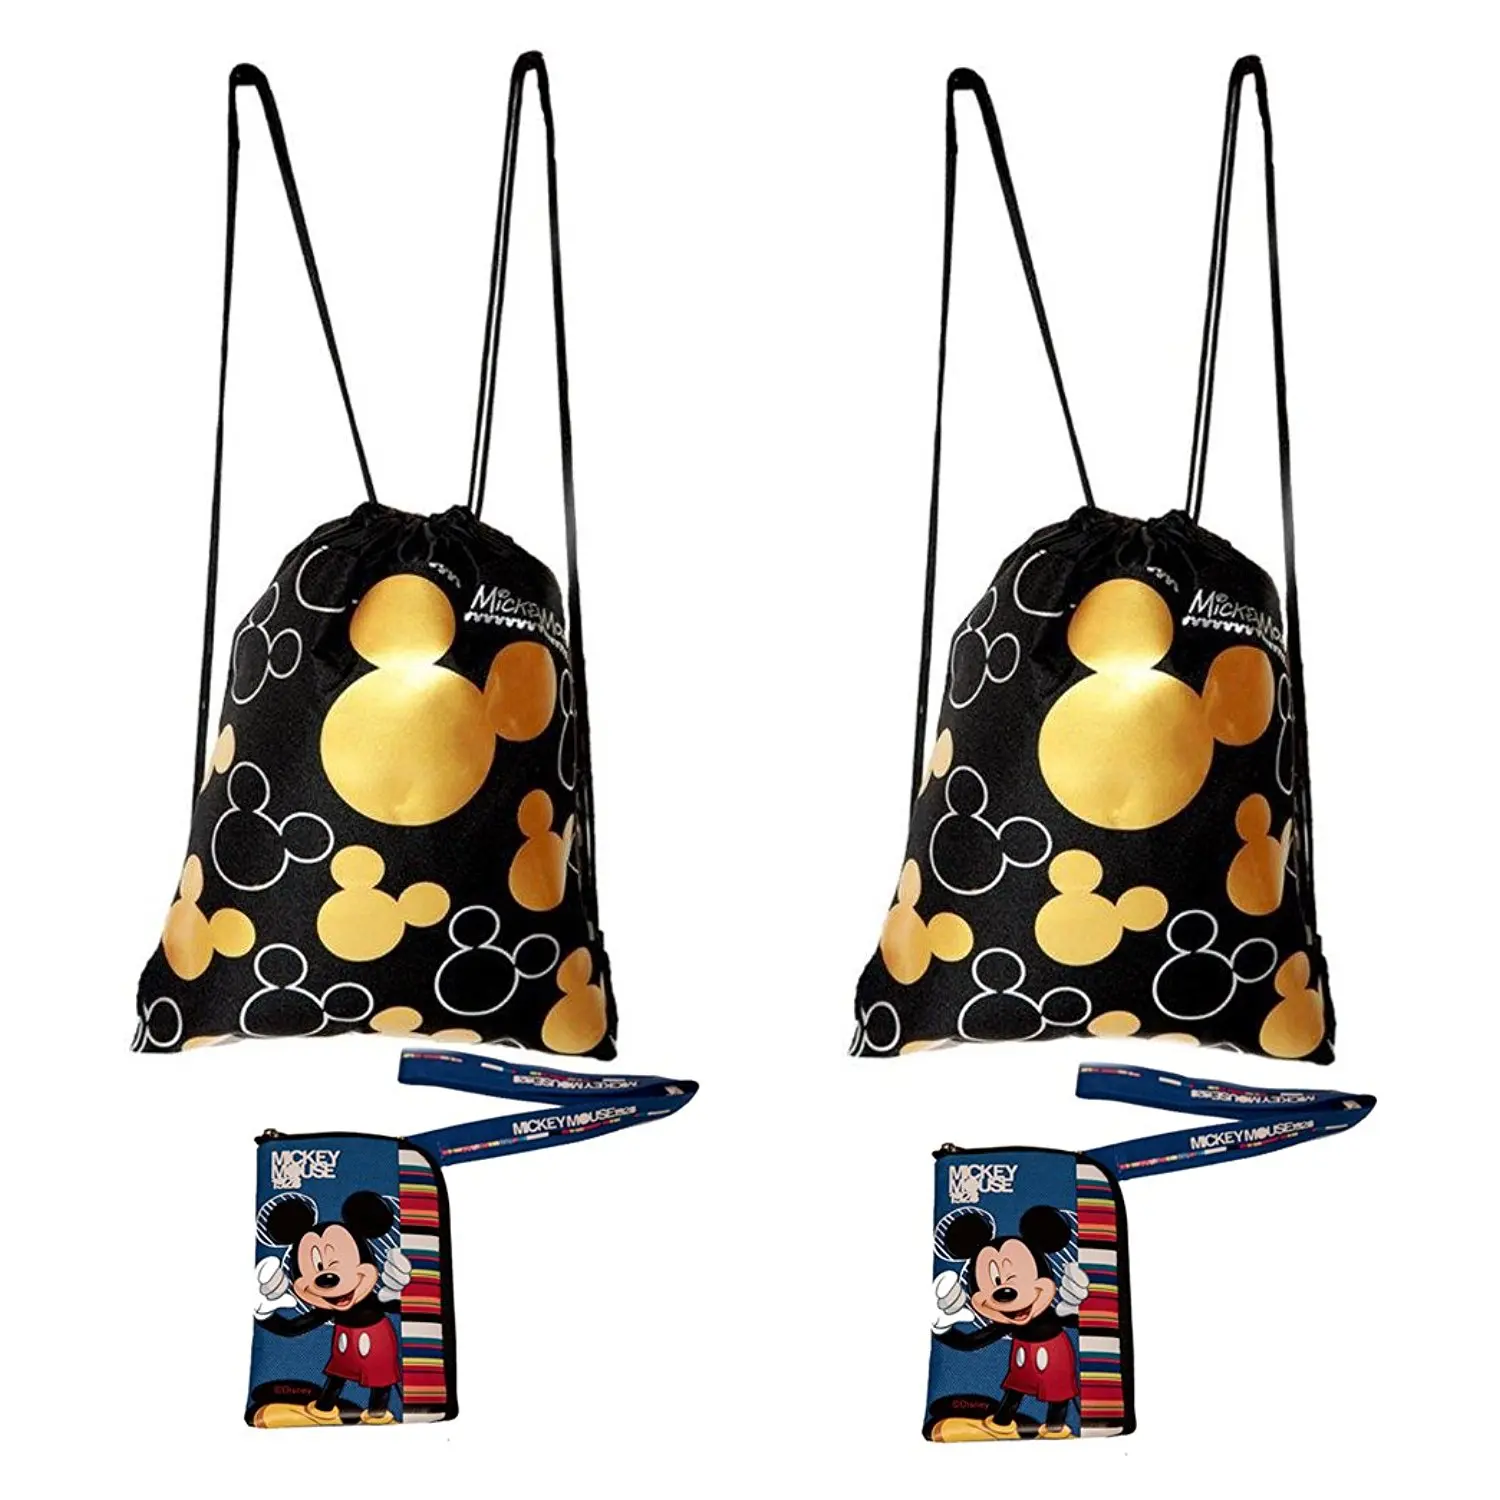 Buy Boys Disney Mickey Mouse Blue Drawstring School Sports Gym & Swimming Bag in Cheap Price on ...